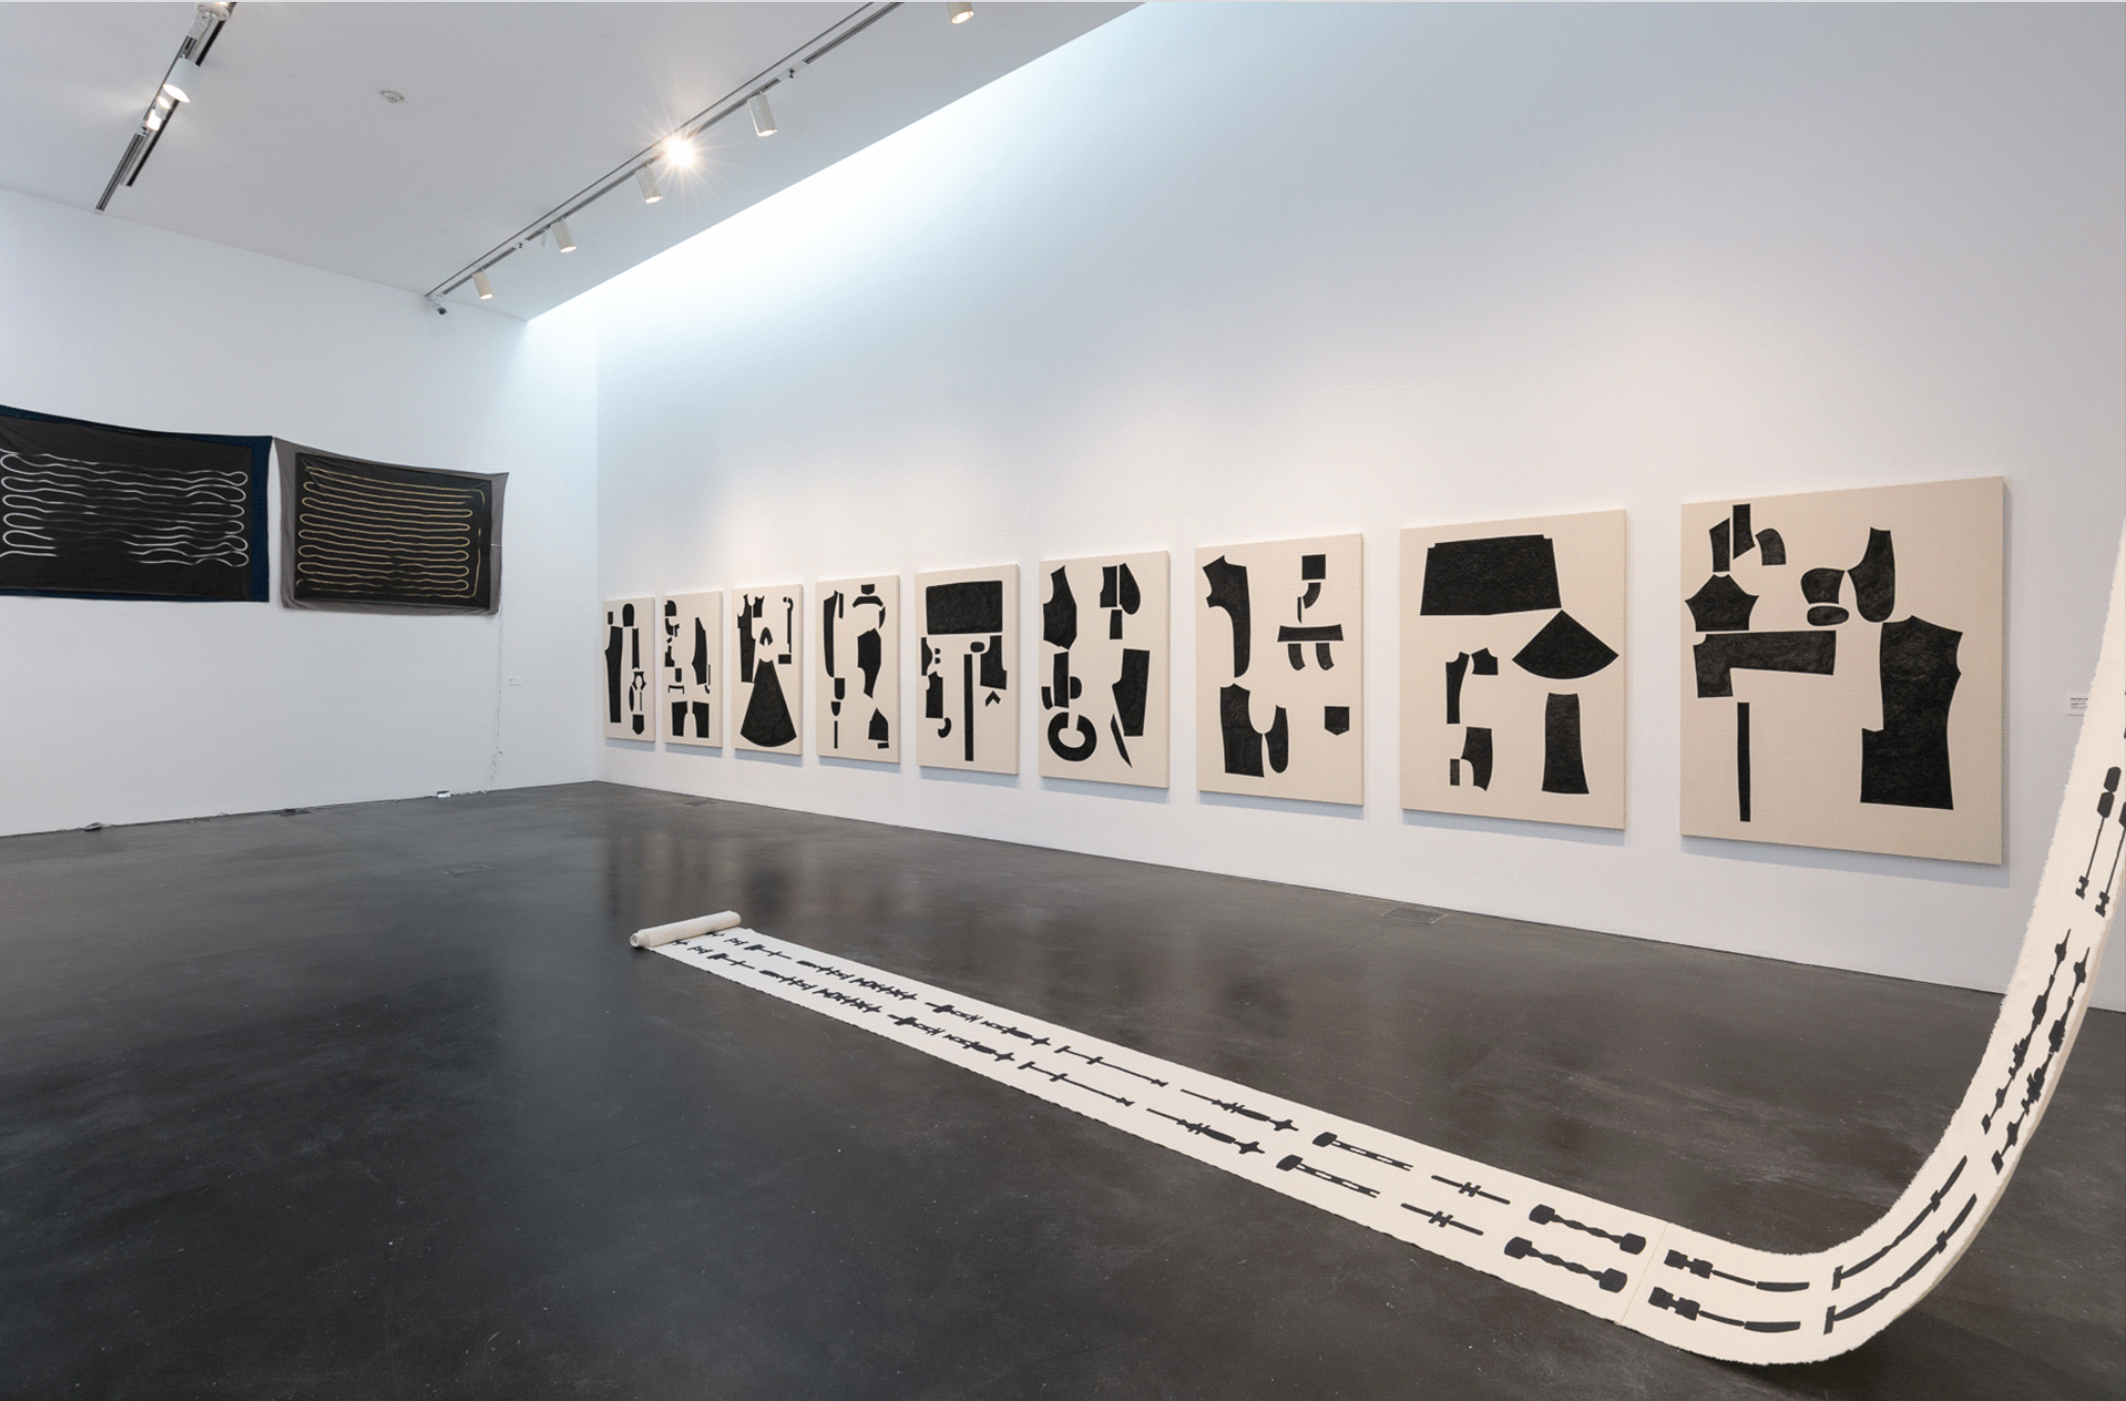 An installation in an industrial gallery space featuring abstract black-and-white prints on one wall and a long white scroll atop which symbols in black are etched. It extends into the middle of the room.